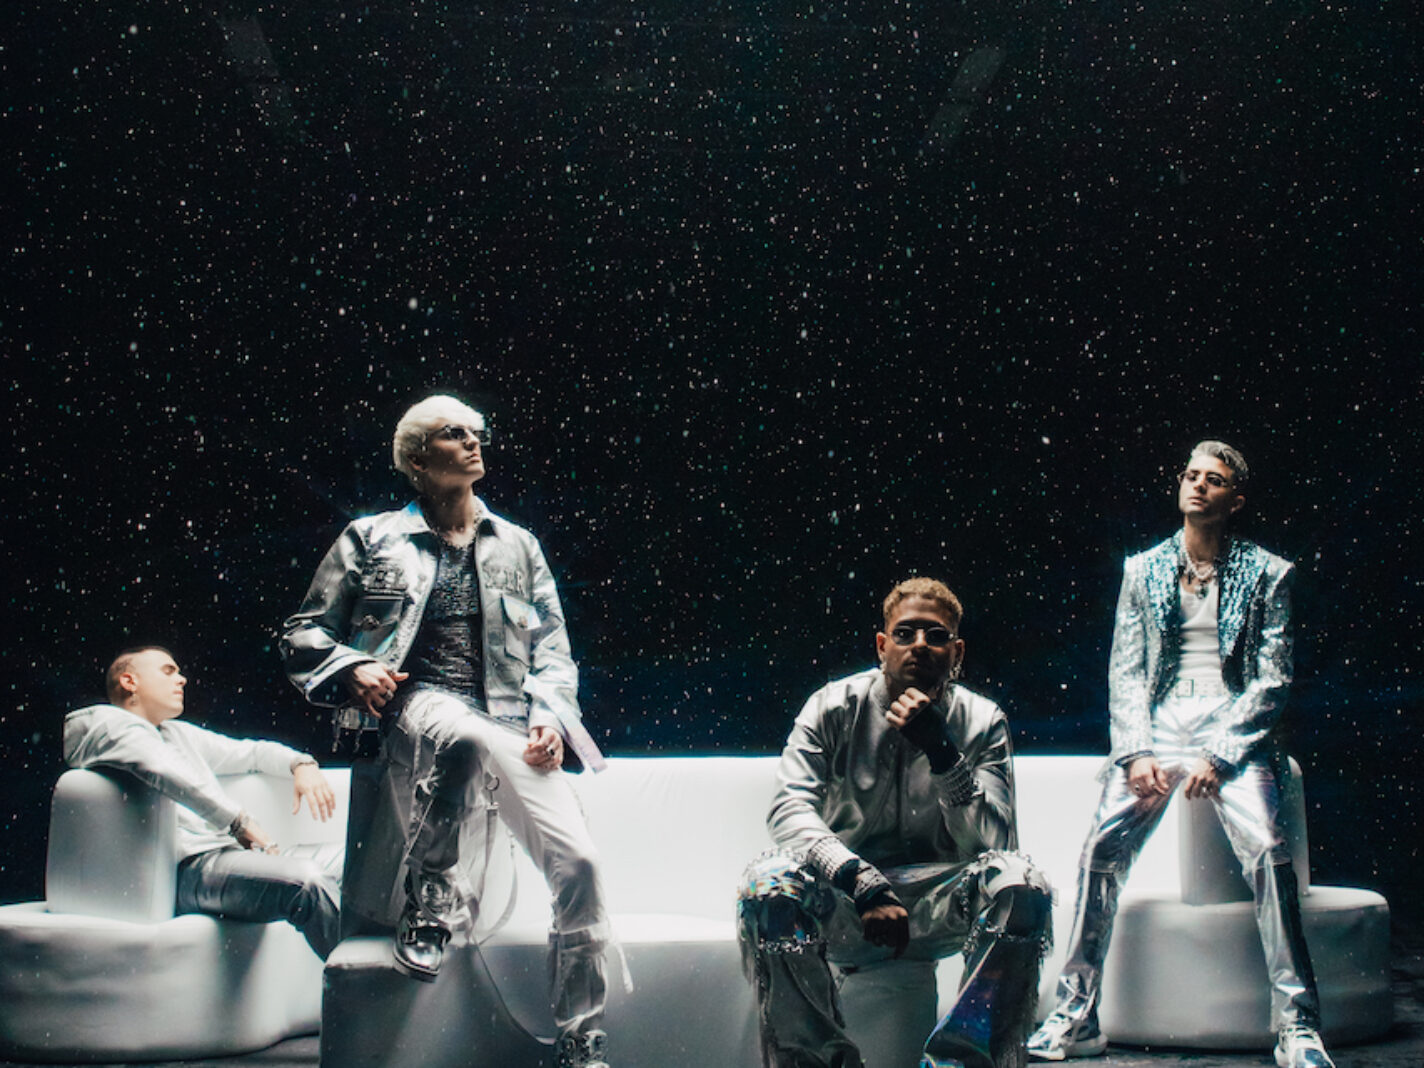 WATCH: CNCO Returns With Retro-Futuristic Banger 'Party, Humo, y Alcohol'